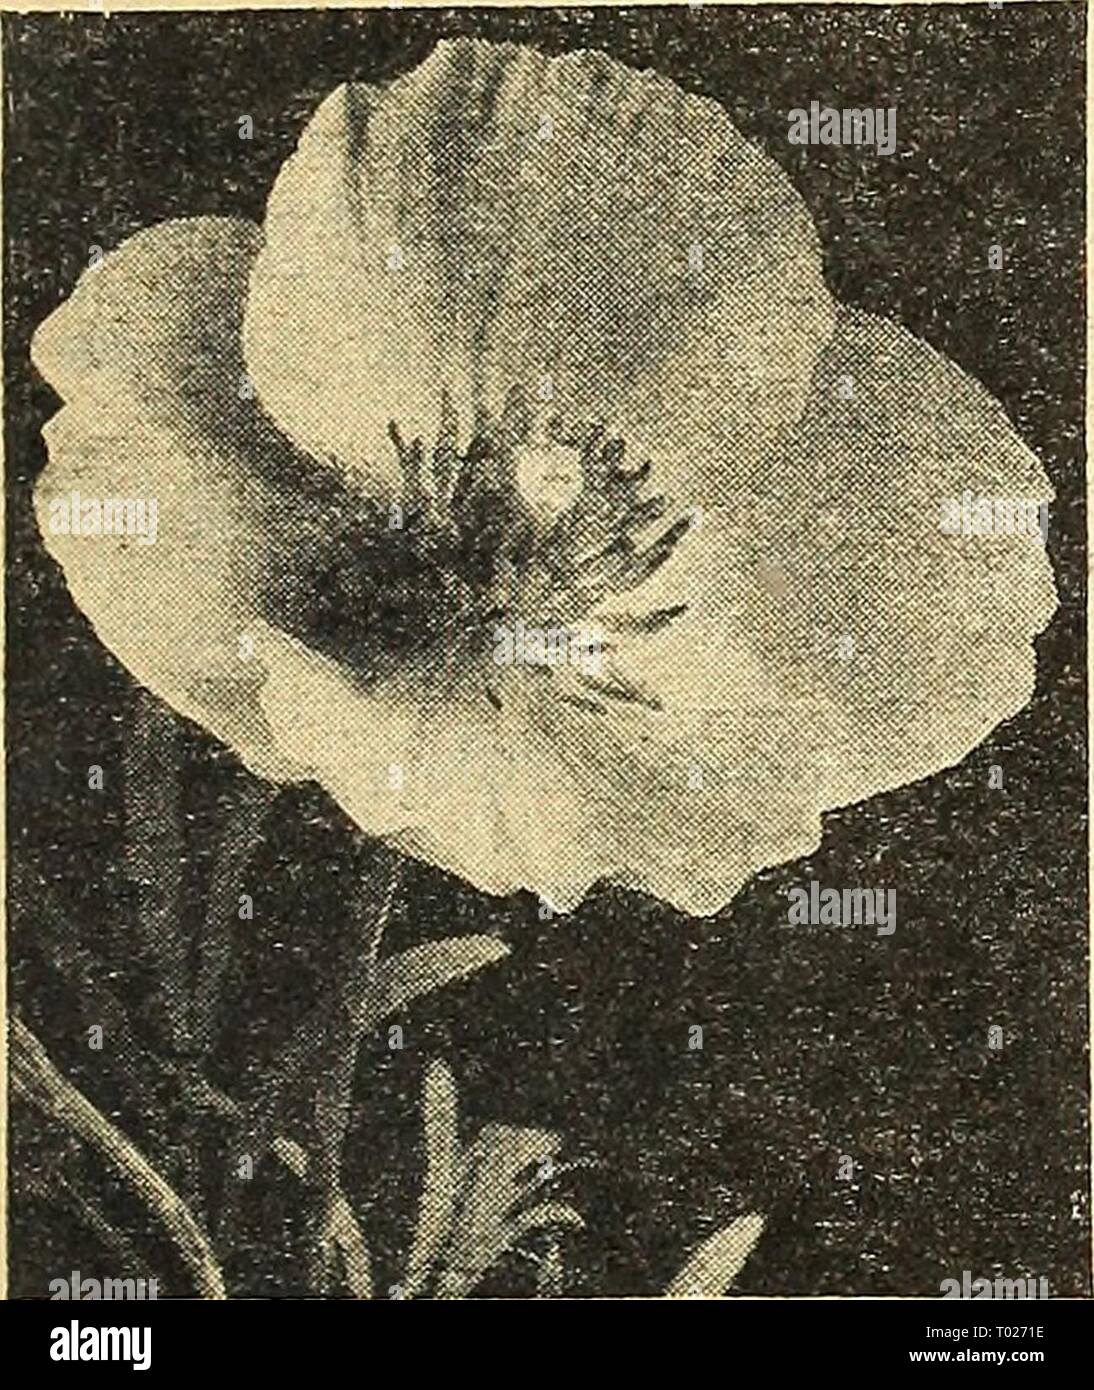 Dreer's garden book for 1945 . dreersgardenbook1945henr Year: 1945  Honesty—Lunaria biennis Honesty ® Lun aria—Moon wort 2665 Biennis alba. A hardy biennial much admired for the silvery mem- branes of its seed pods. Extensively used for house decoration. 3 ft. Pkt. 10c; large pkt. 40c.    Hunnemannia—Santa Barbara Poppy Hunnemanniei ® Giant Yellow Tulip Poppy Santa Barbara Poppy- Bush Eschscholtzia 2673 Fumariaefolia. This is by far the best of the Poppy family for cutting, remaining in good condition for sev- eral days. Seeds sown early in April will have grown into bushy plants covered with  Stock Photo